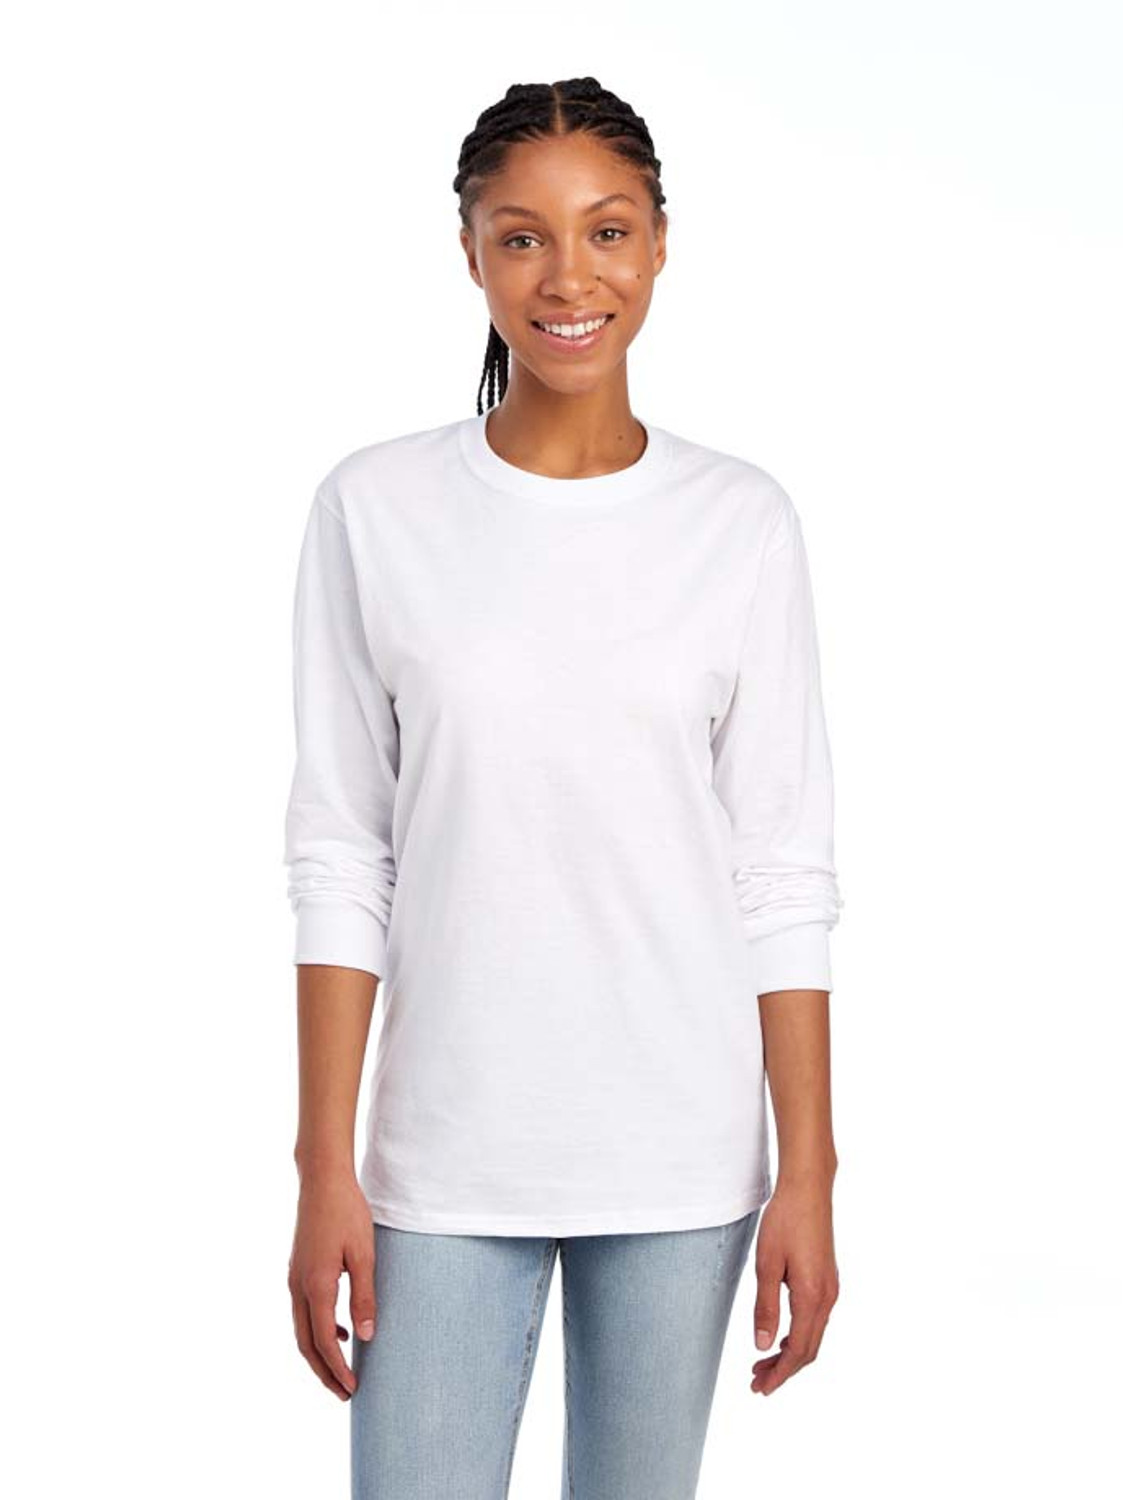 Fruit of the Loom 4930 100% Heavy Cotton™ Long-Sleeve T-Shirt 